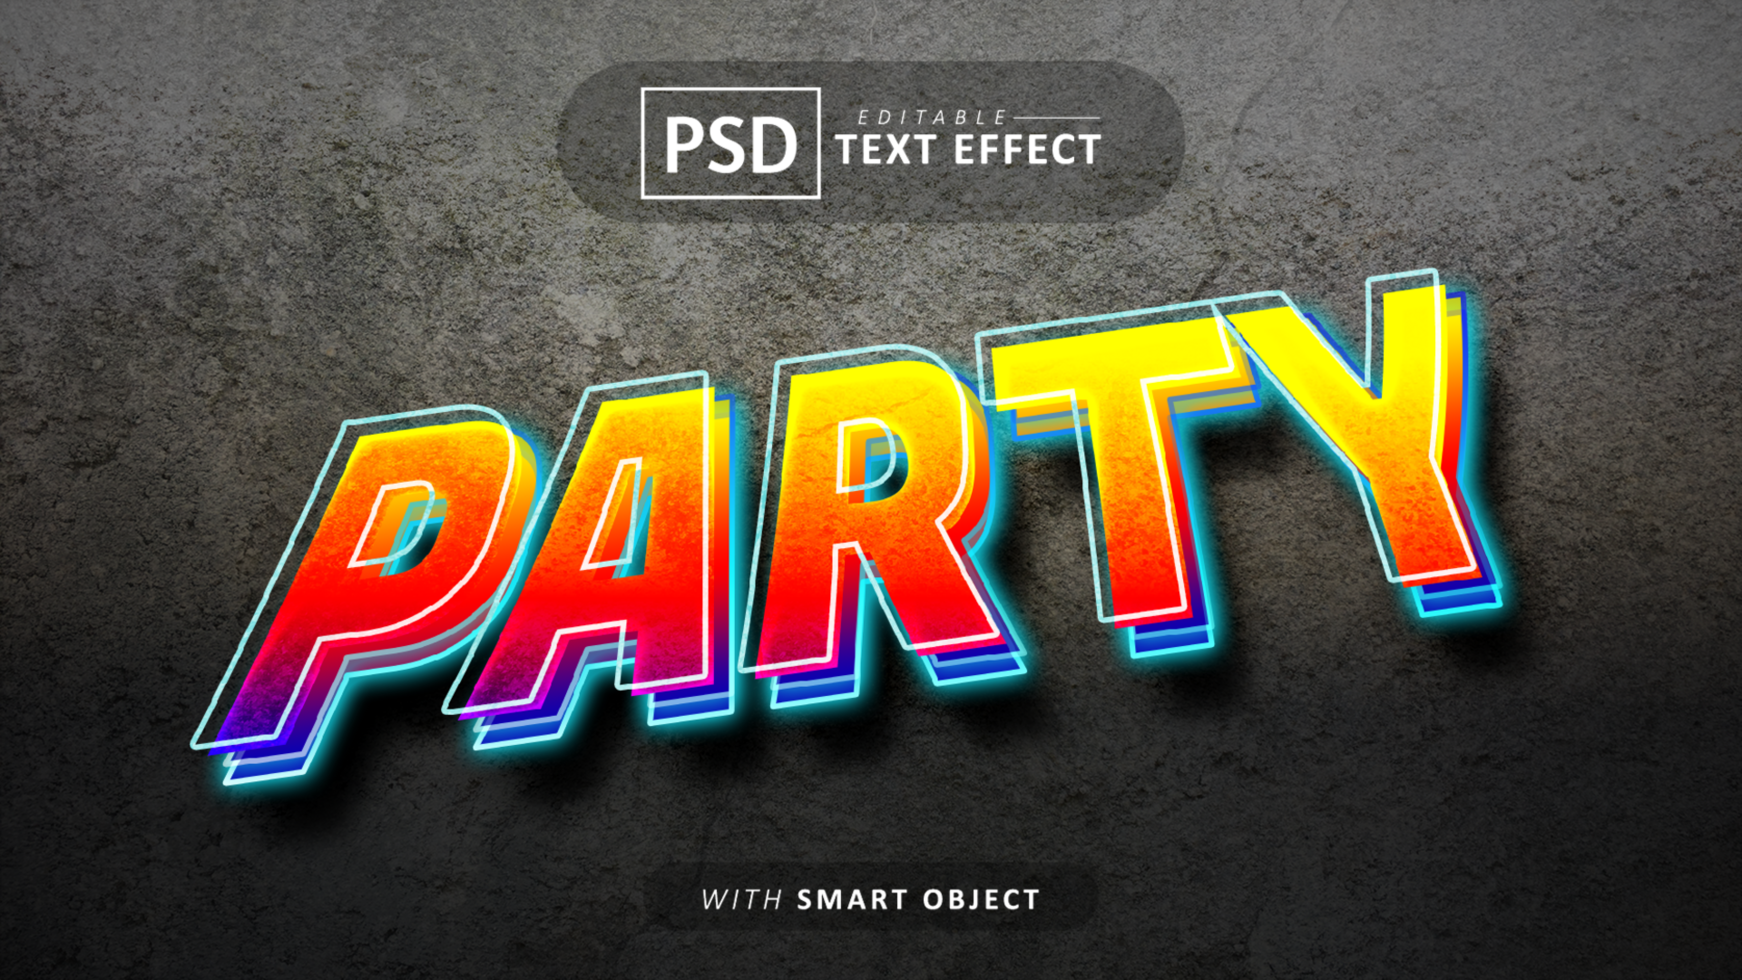 Party text effect editable psd